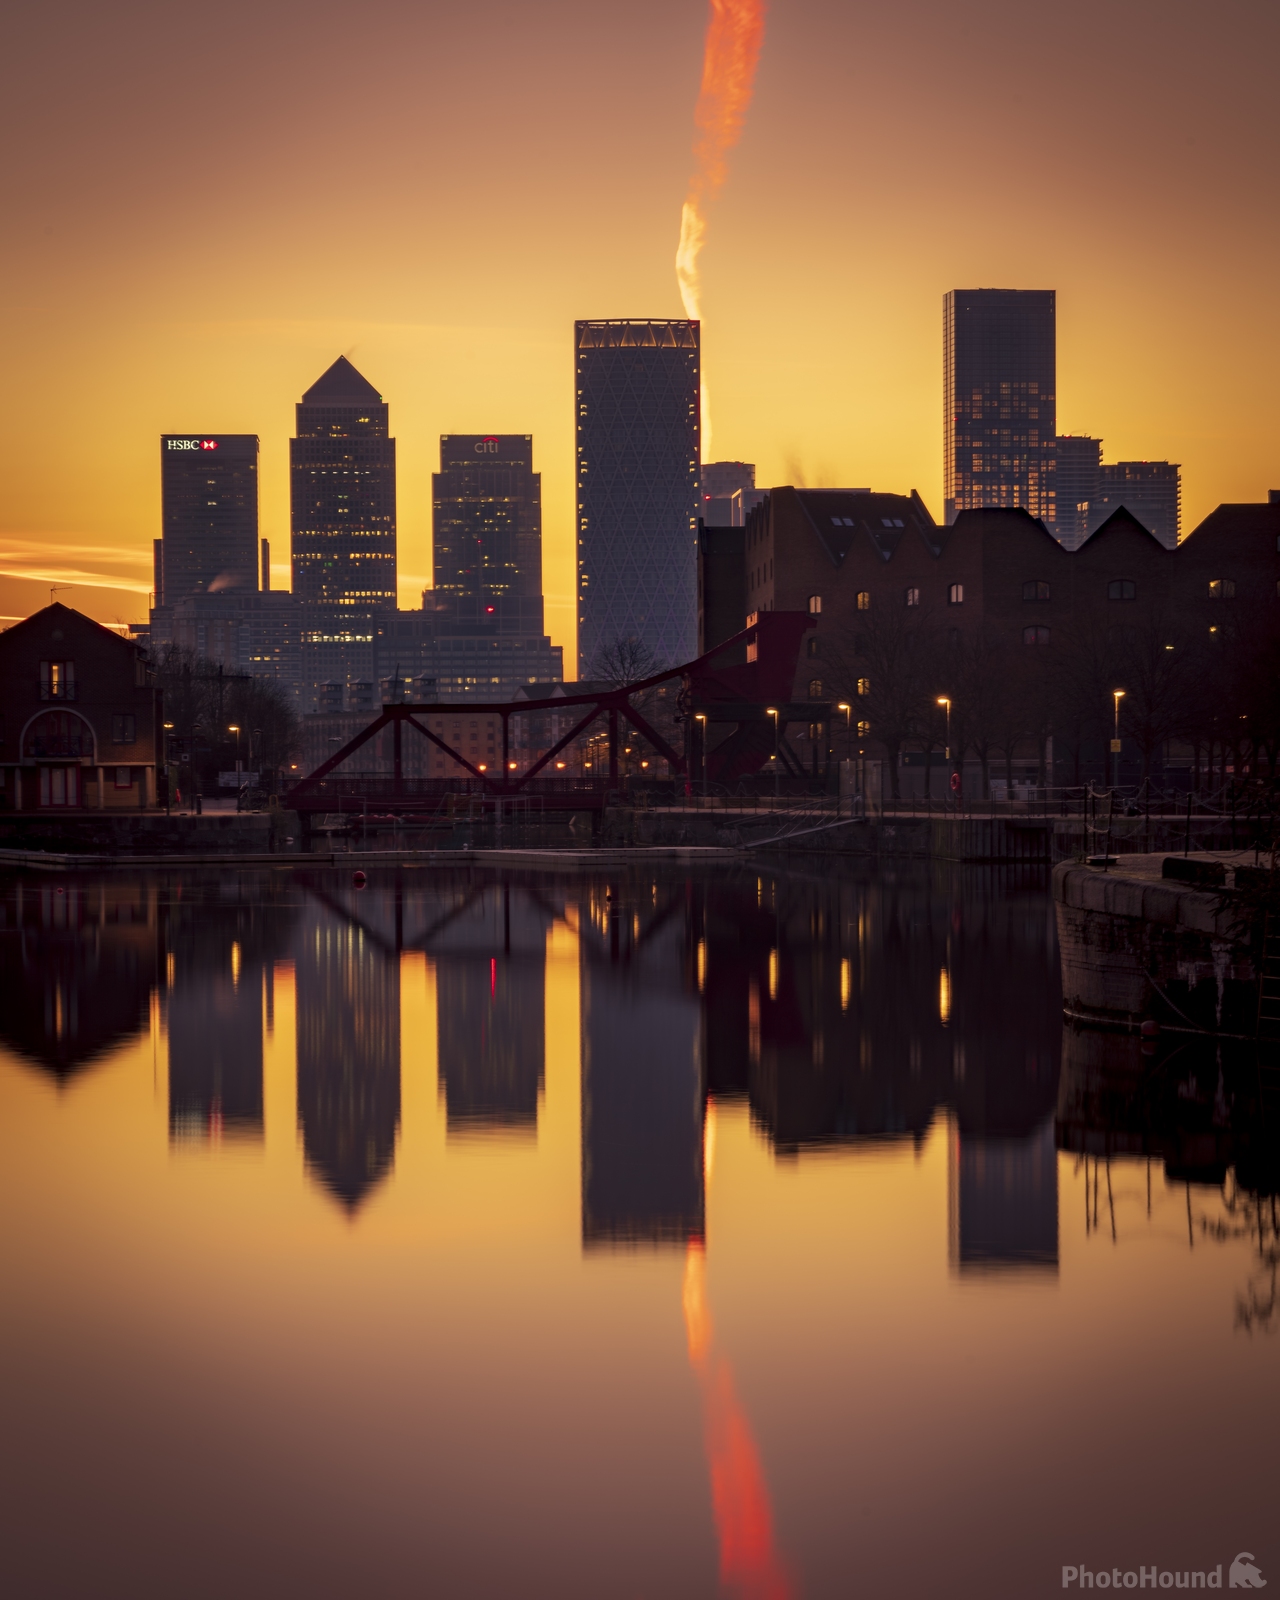 Image of Shadwell Basin by Doug Stratton